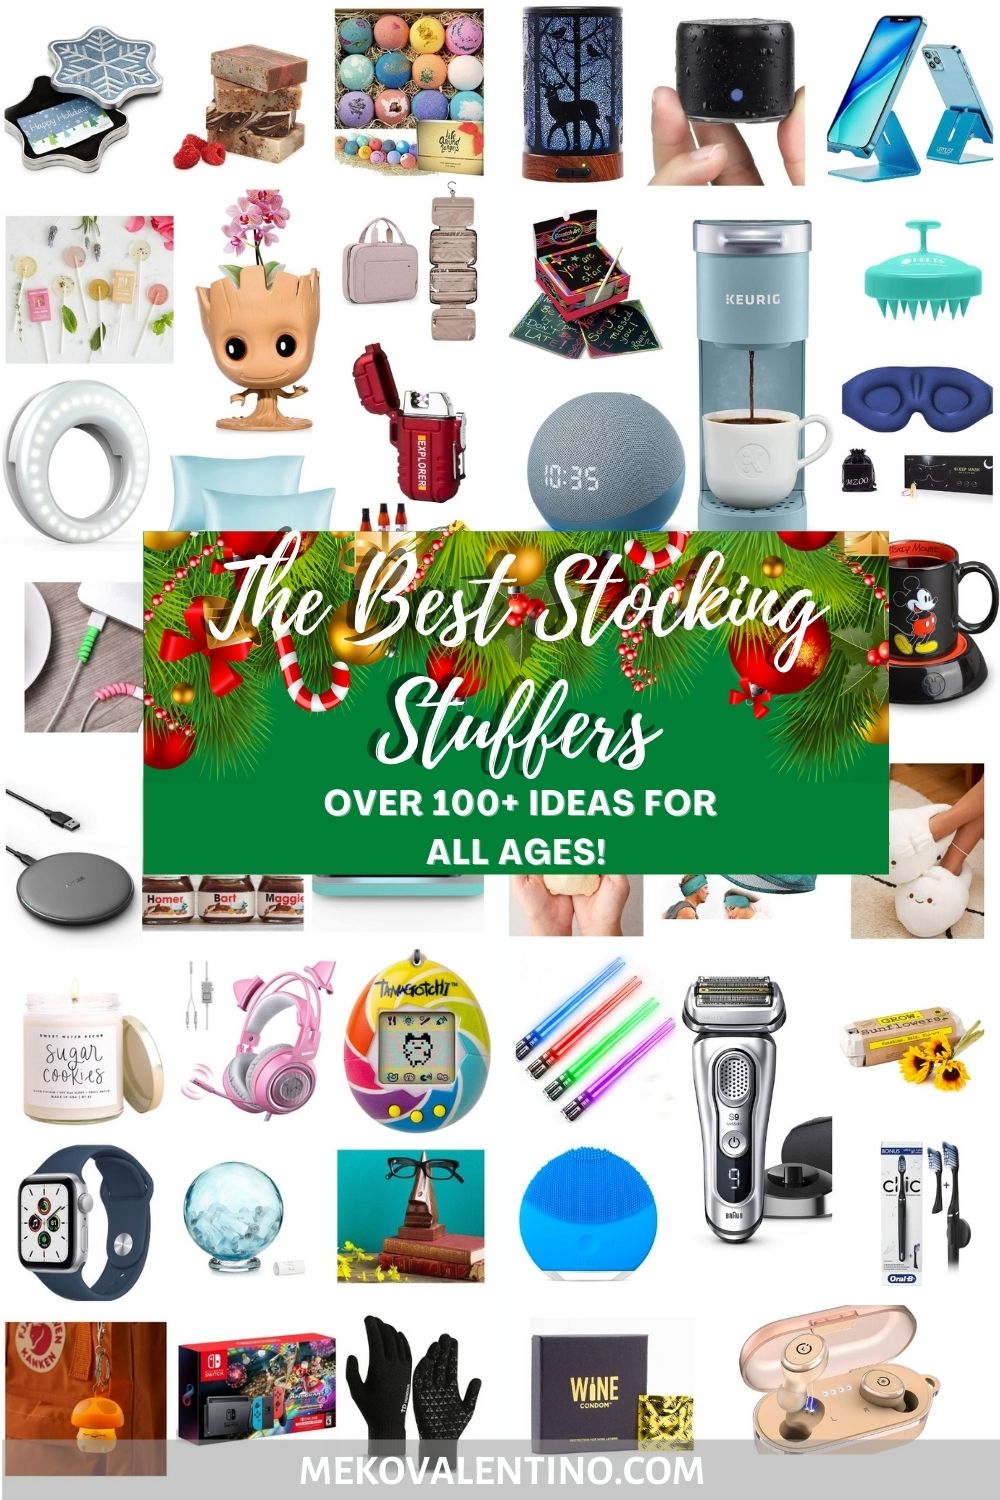 Pinterest Pin | The Best Stocking Stuffers For All Ages Gift Guide by @MekoValentino